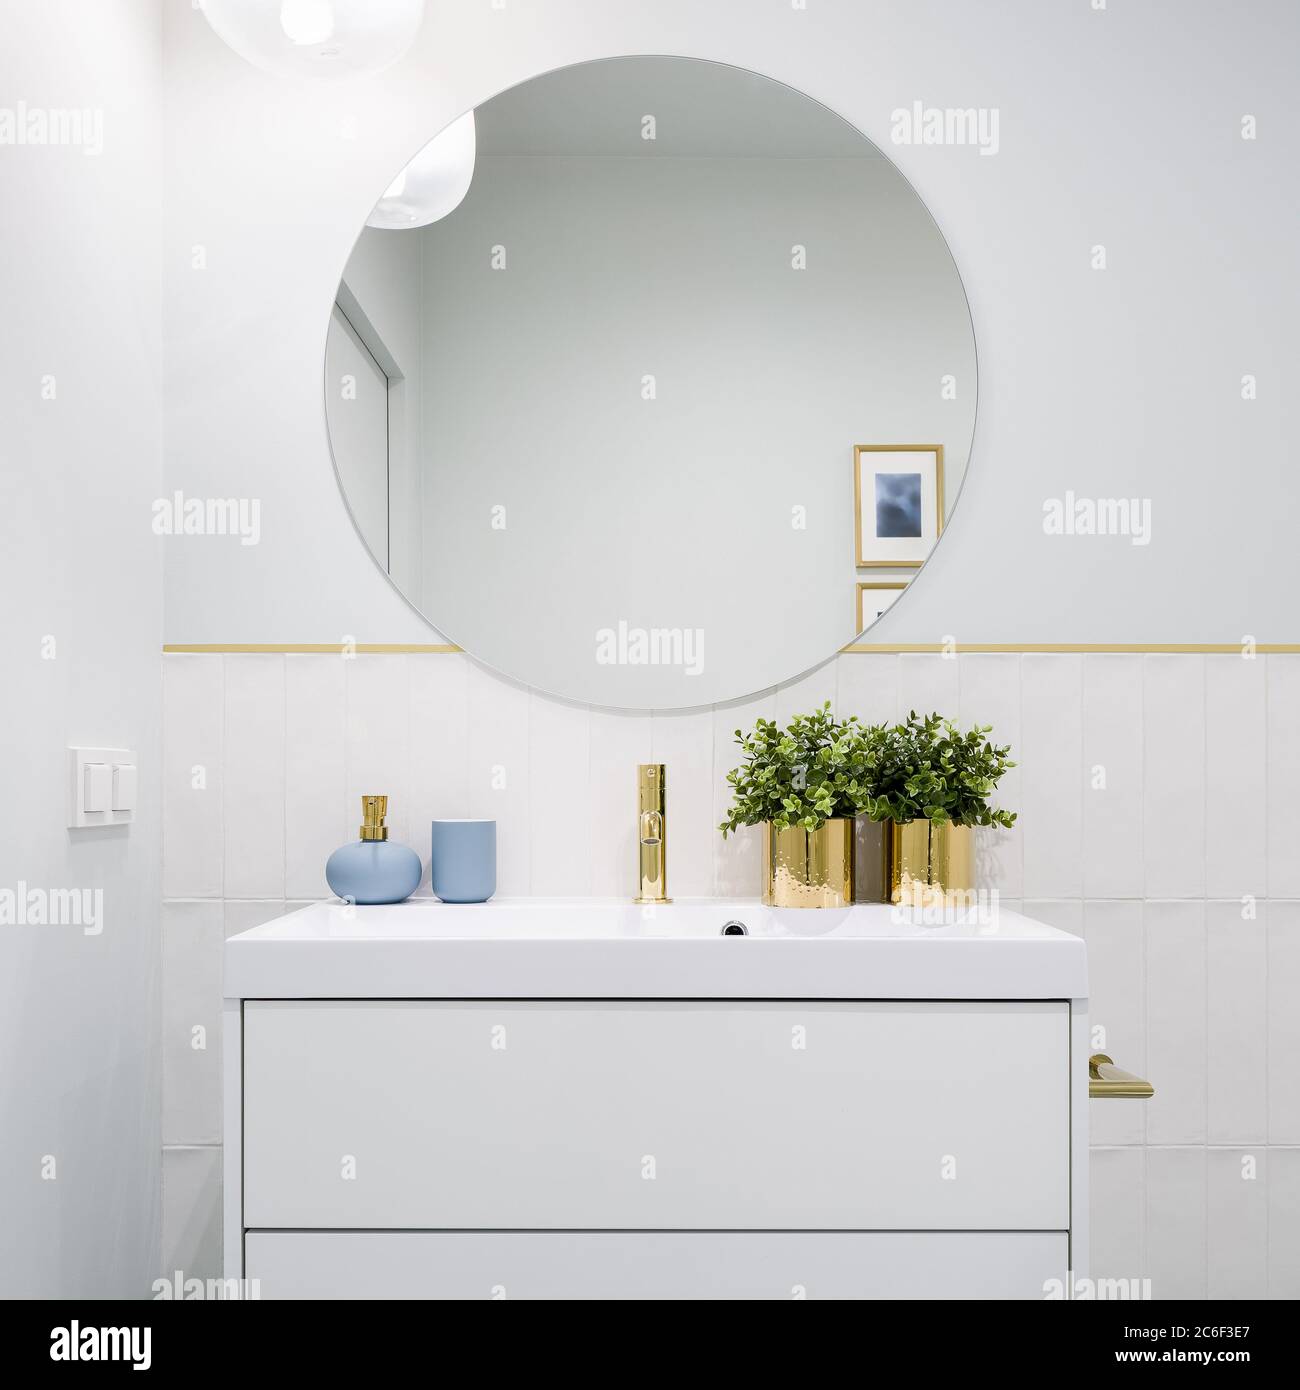 Bright bathroom with round mirror, white cabinet with drawers and blue and golden decorations Stock Photo